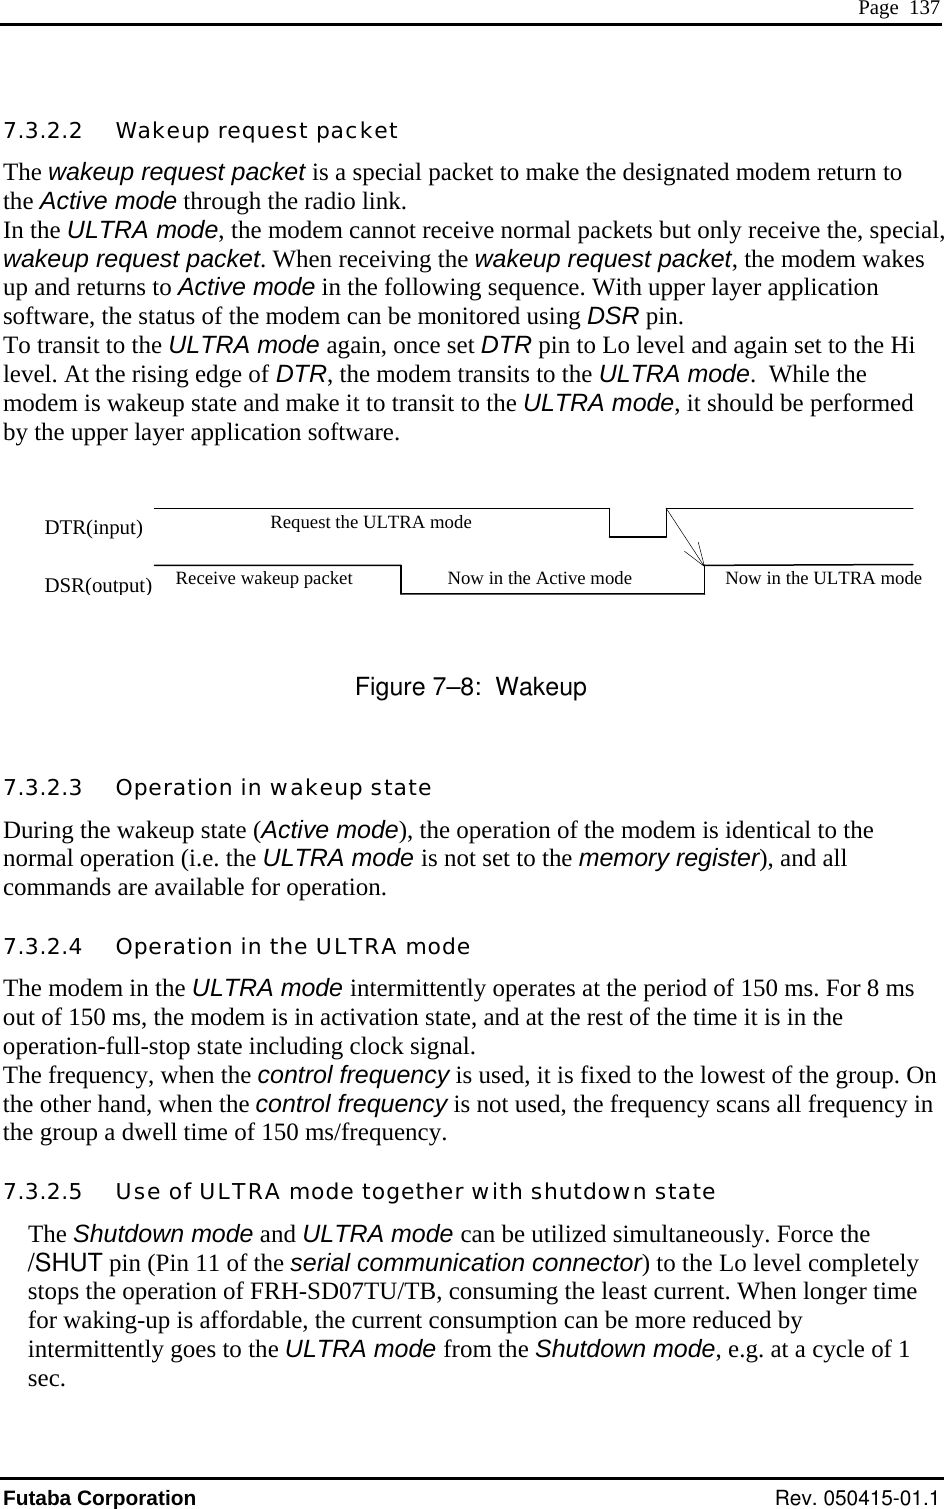  Page  137 7.3.2.2   Wakeup request packet The wakeup request packet is a special packet to make the designated modem return to  link.   d    re 7–8:  Wakeup 7.3.2.3 tion inDuring the wakeup state  e normal i.e. the d all comma ilable operation-full-stop state including clock signal. The frequency, when the control frequency is used, it is fixed to the lowest of the group. On the other hand, when the control frequency is not used, the frequency scans all frequency in the group a dwell time of 150 ms/frequency. 7.3.2.5   Use of ULTRA mode together with shutdown state The Shutdown mode and ULTRA mode can be utilized simultaneously. Force the /SHUT pin (Pin 11 of the serial communication connector) to the Lo level completely stops the operation of FRH-SD07TU/TB, consuming the least current. When longer time for waking-up is affordable, the current consumption can be more reduced by intermittently goes to the ULTRA mode from the Shutdown mode, e.g. at a cycle of 1 sec. the Active mode through the radioIn the ULTRA mode, the modem cannot receive normal packets but only receive the, special,wakeup request packet. When receiving the wakeup request packet, the modem wakes up and returns to Active mode in the following sequence. With upper layer application software, the status of the modem can be monitored using DSR pin. To transit to the ULTRA mode again, once set DTR pin to Lo level and again set to the Hi level. At the rising edge of DTR, the modem transits to the ULTRA mode.  While the modem is wakeup state and make it to transit to the ULTRA mode, it should be performeby the upper layer application software.     Figu   Opera  wakeup state (Active mode), the operation of the modem is identical to th operation (  ULTRA mode is not set to the memory register), annds are ava for operation.  7.3.2.4   Operation in the ULTRA mode The modem in the ULTRA mode intermittently operates at the period of 150 ms. For 8 ms out of 150 ms, the modem is in activation state, and at the rest of the time it is in the Request the ULTRA mode DTR(input) Receive wakeup packet Now in the Active mode Now in the ULTRA modeDSR(output) Futaba Corporation Rev. 050415-01.1 